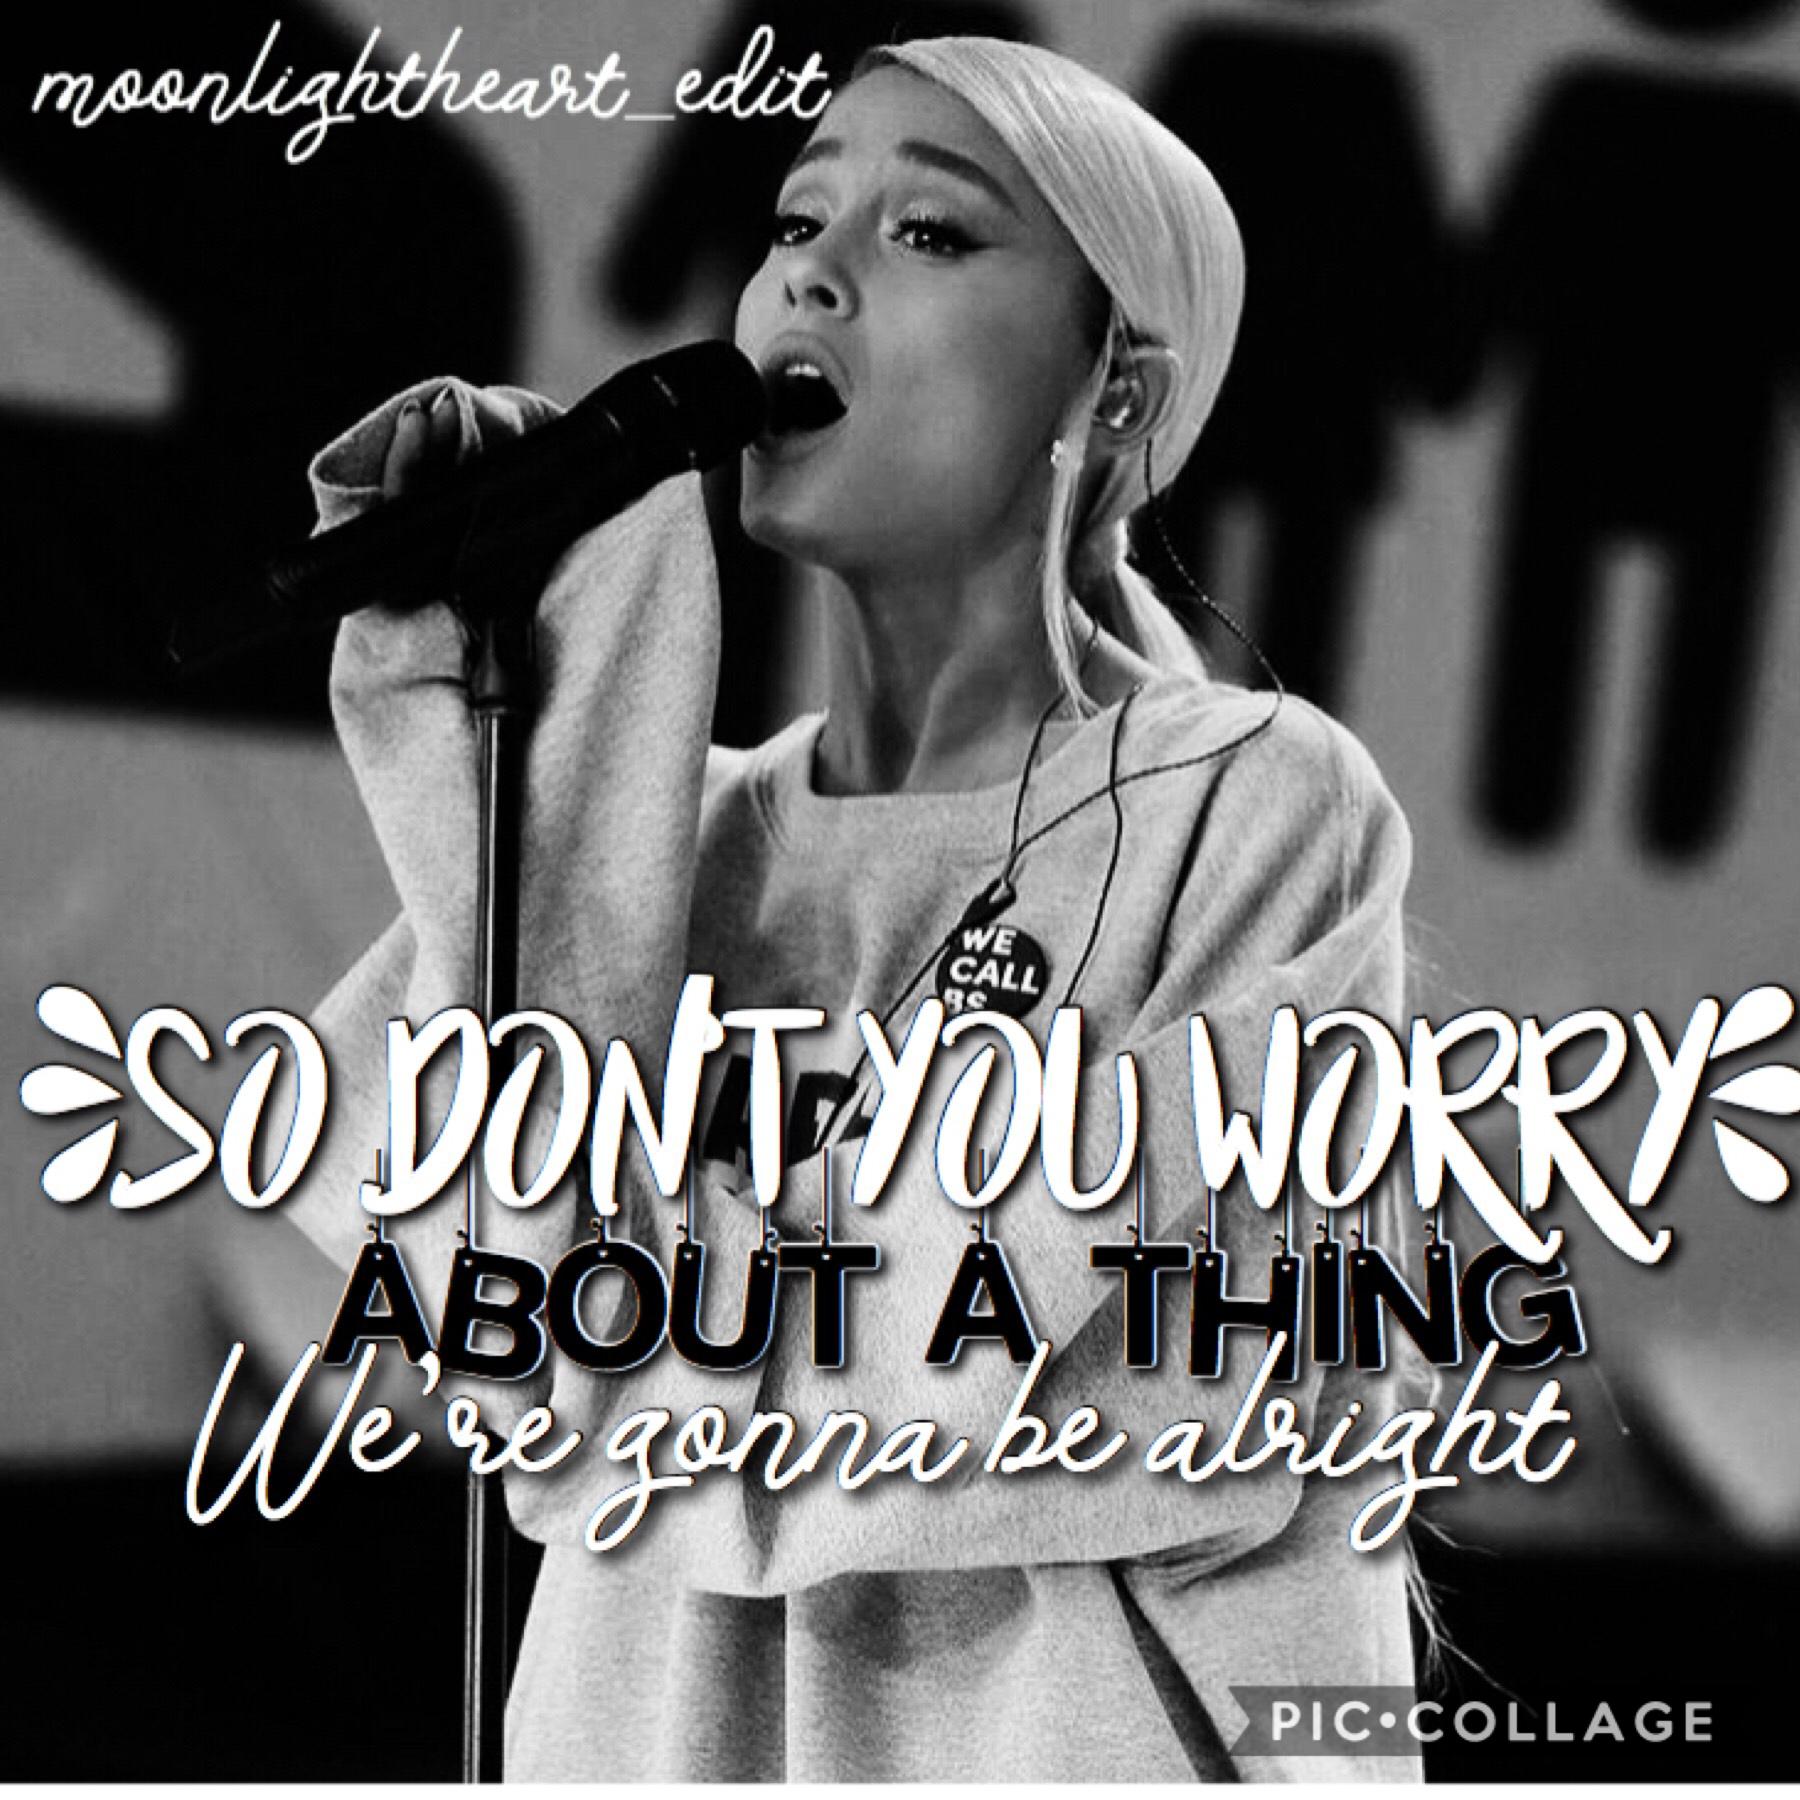 Be alright by Ariana Grande. Luv this song and moonlight as well. QOTD:What’s your favorite song??
Please like and comment
Xoxo, dia